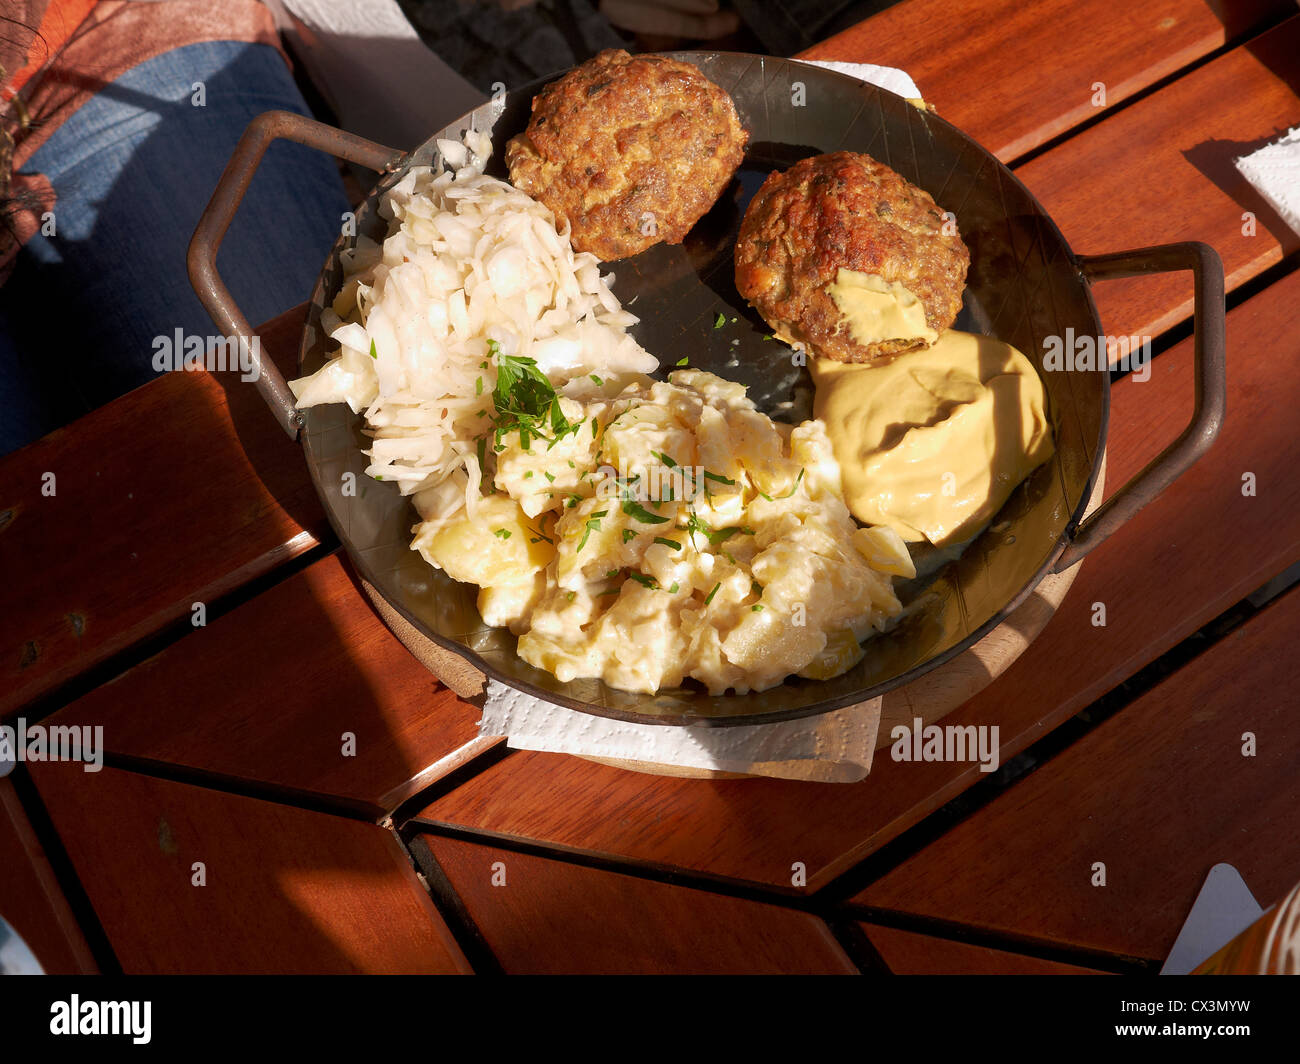 Typical German tasty dish,meatball with potato salad and cabbage salad Stock Photo